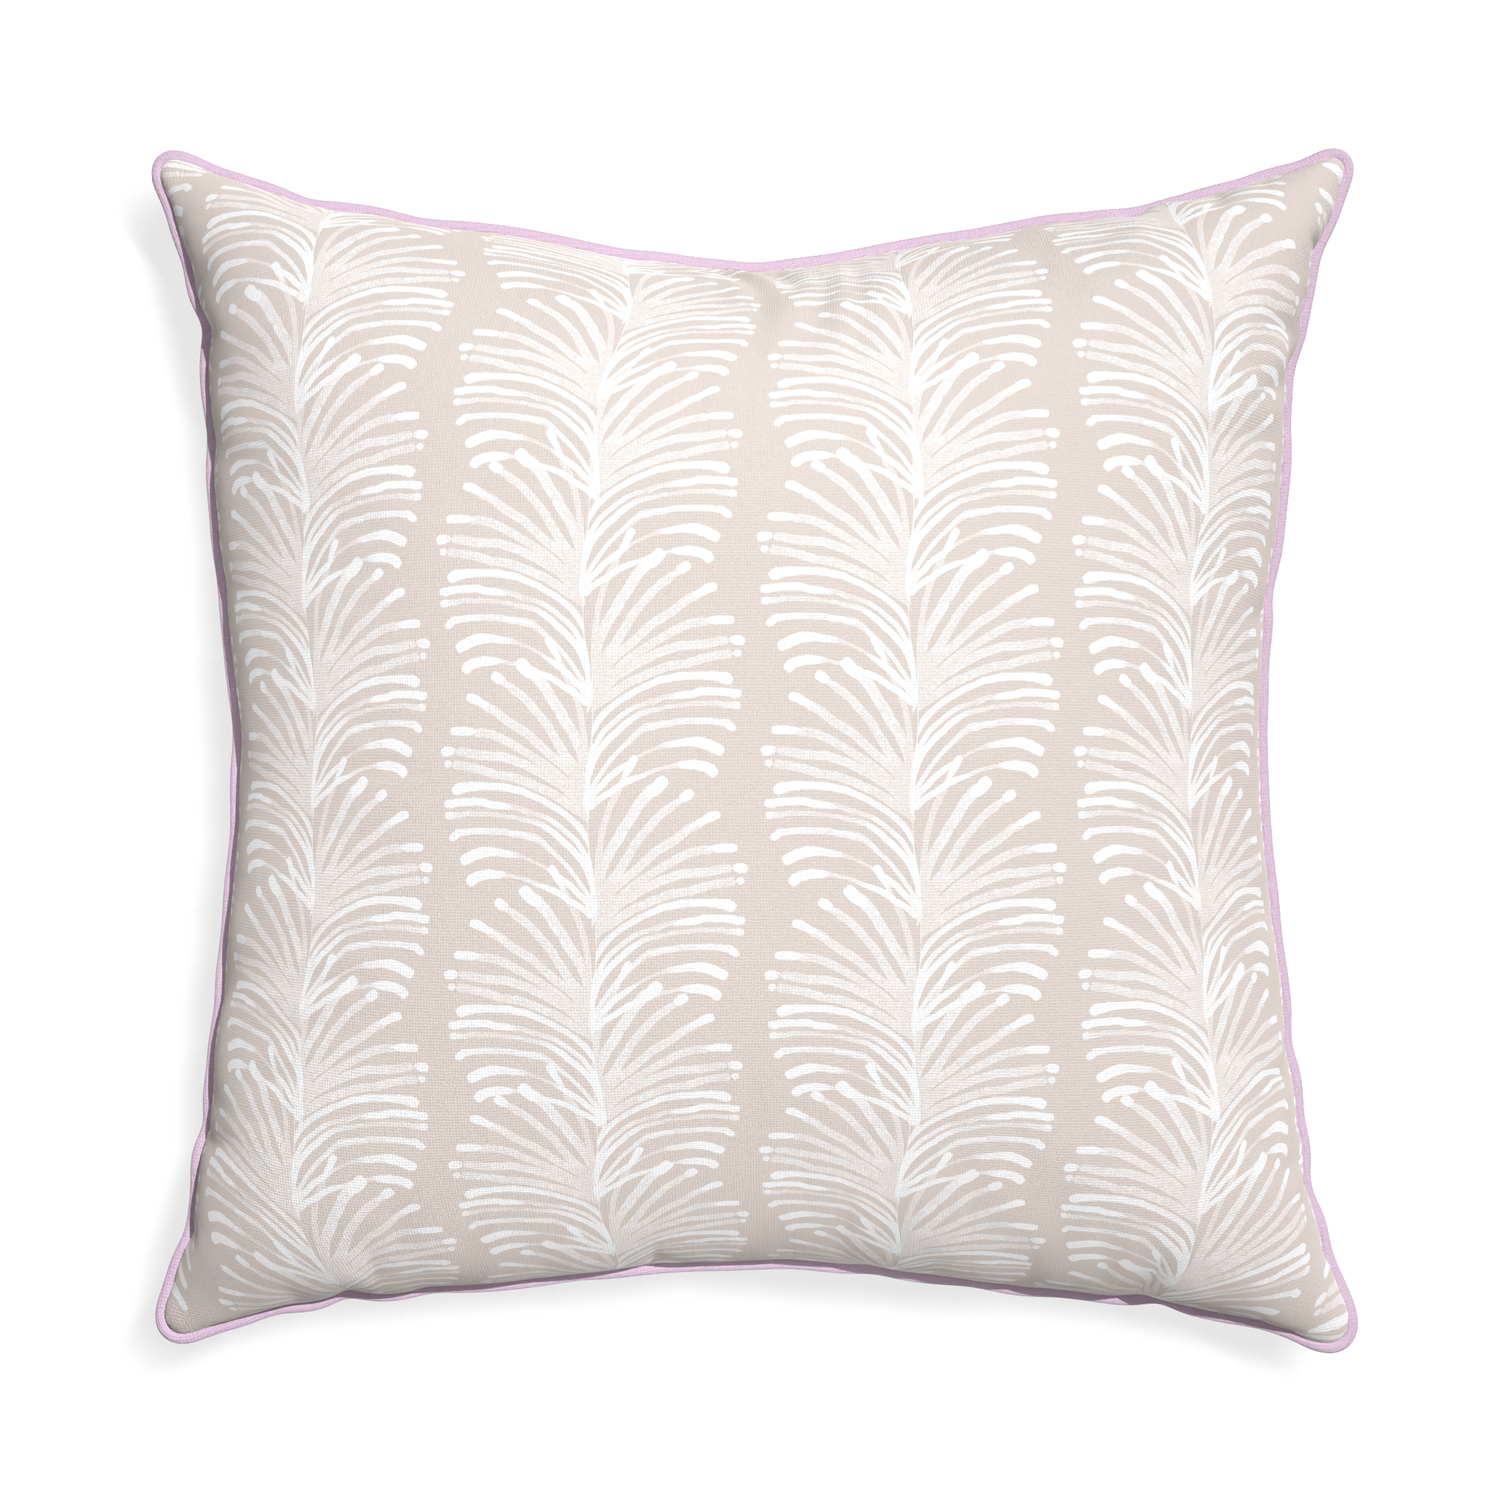 Euro-sham emma sand custom sand colored botanical stripepillow with l piping on white background